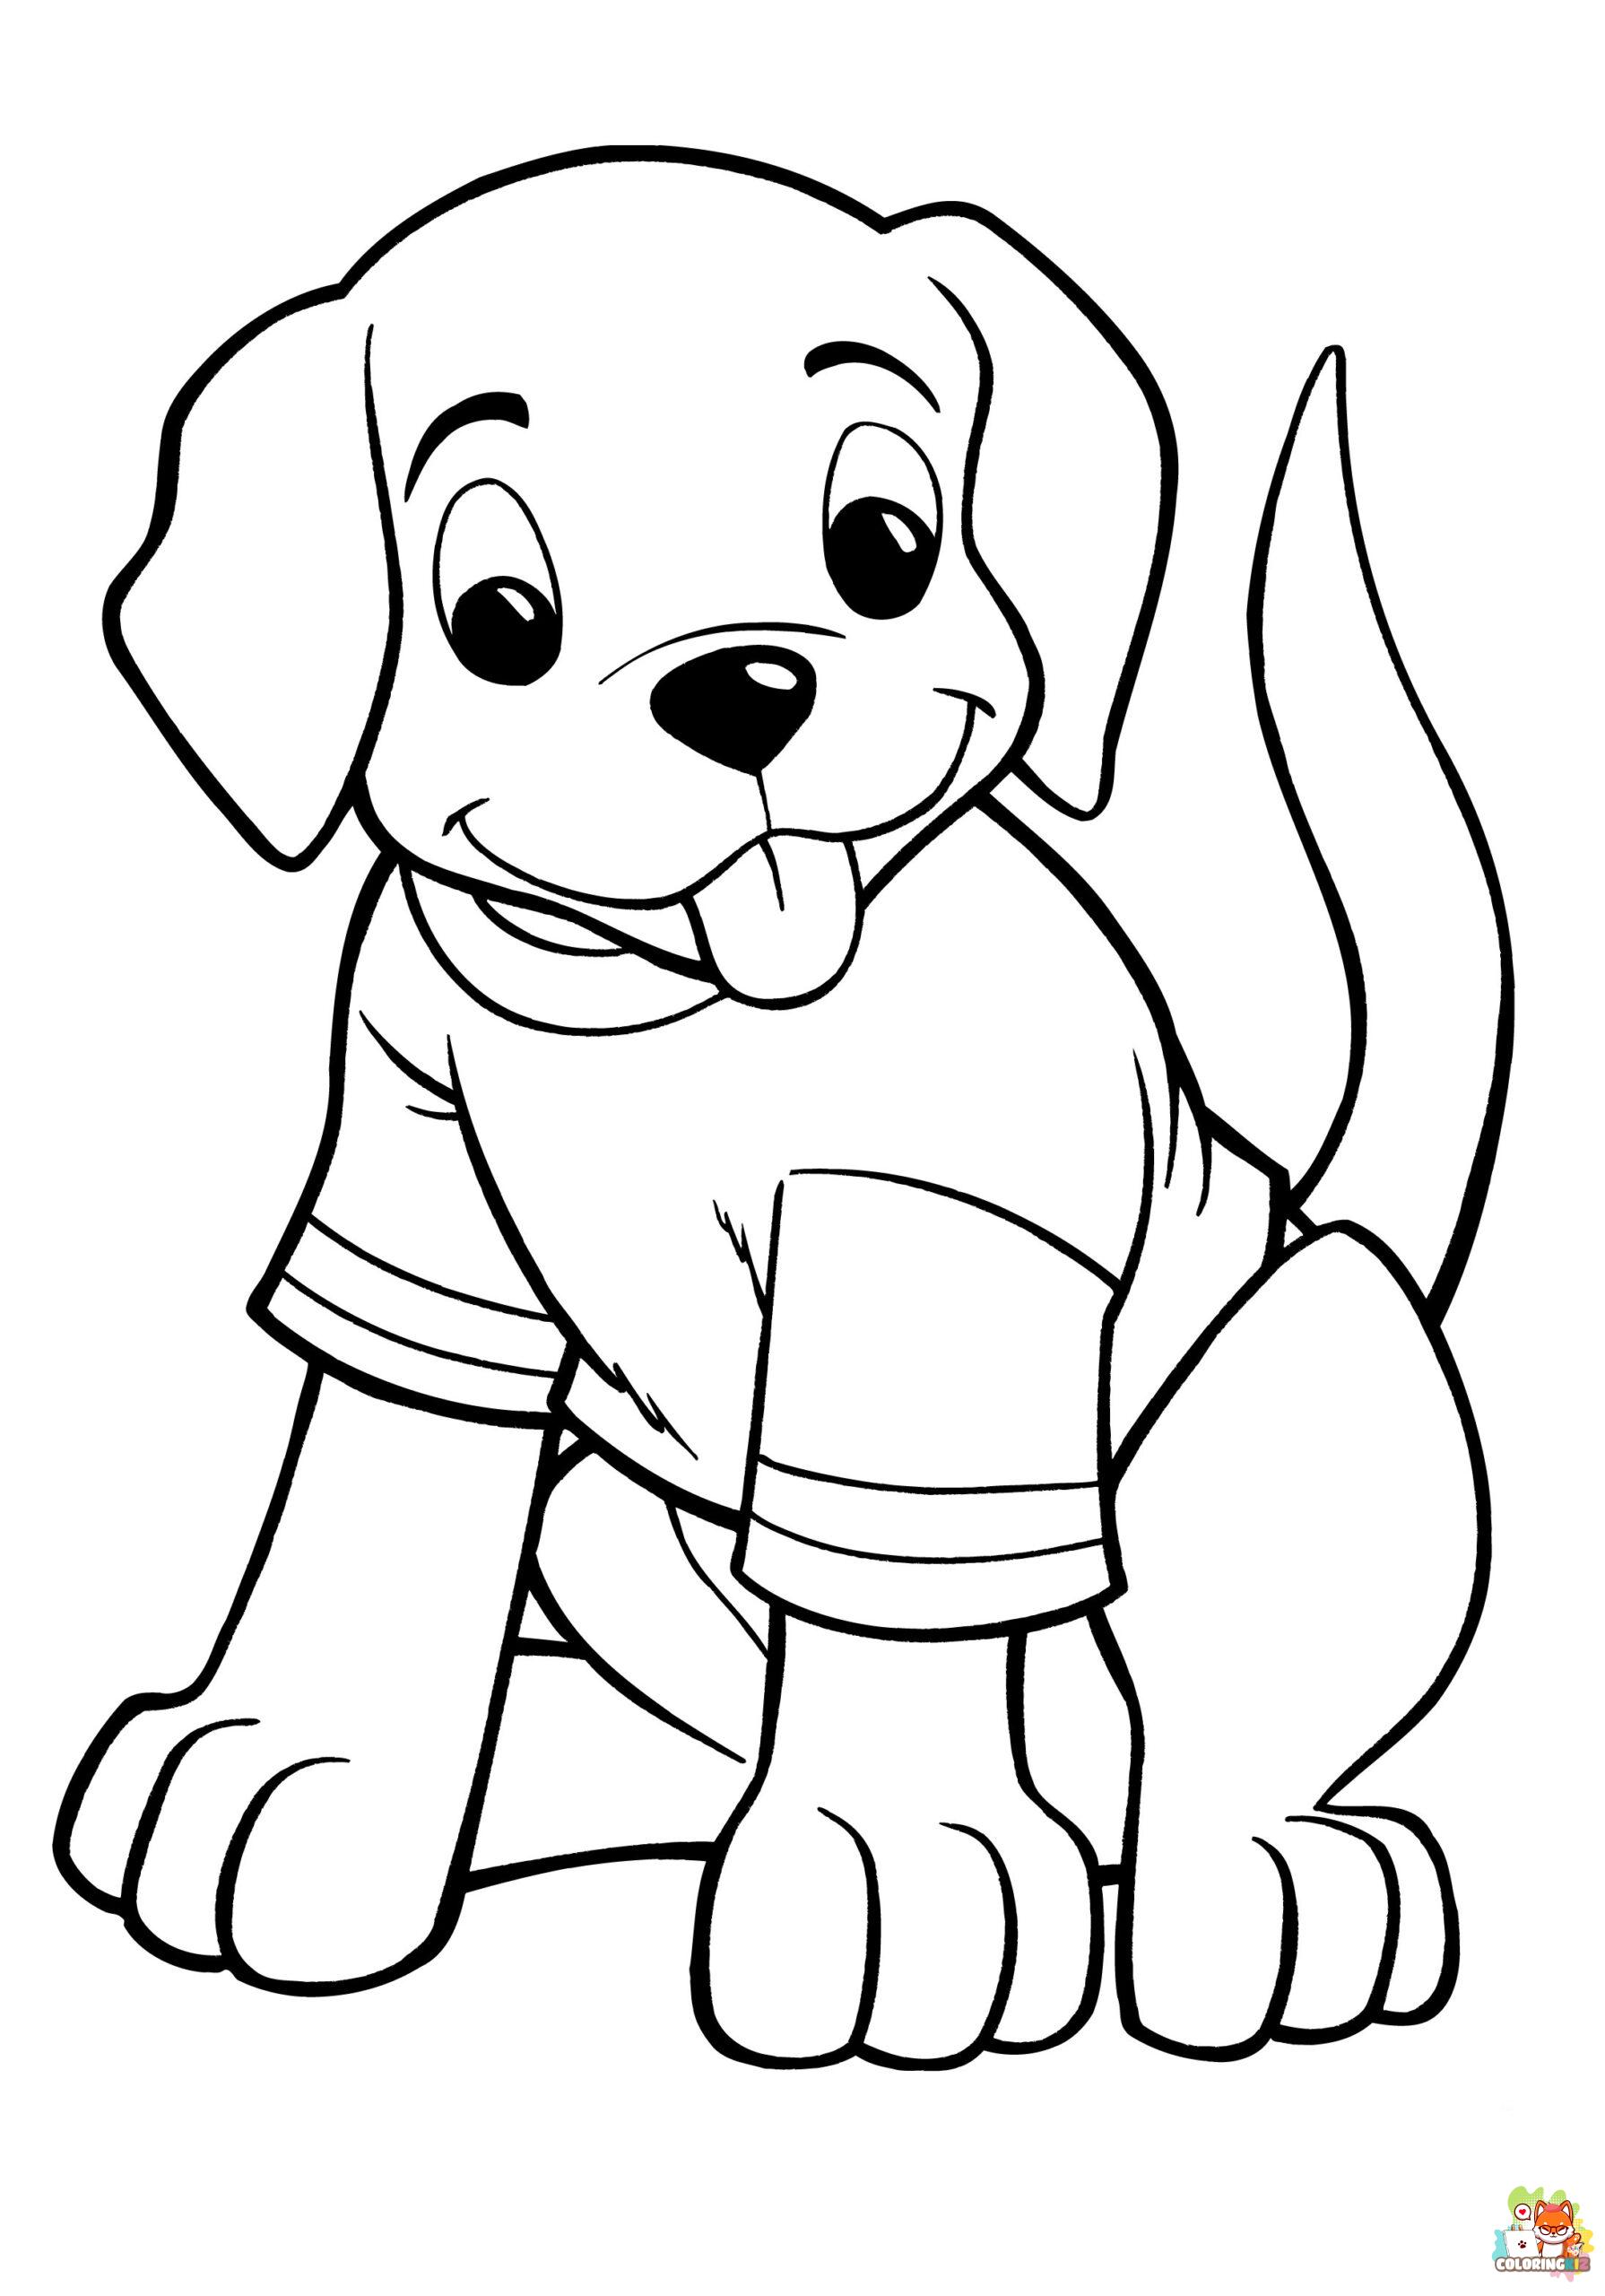 Cinna Puppy Coloring Pages 6